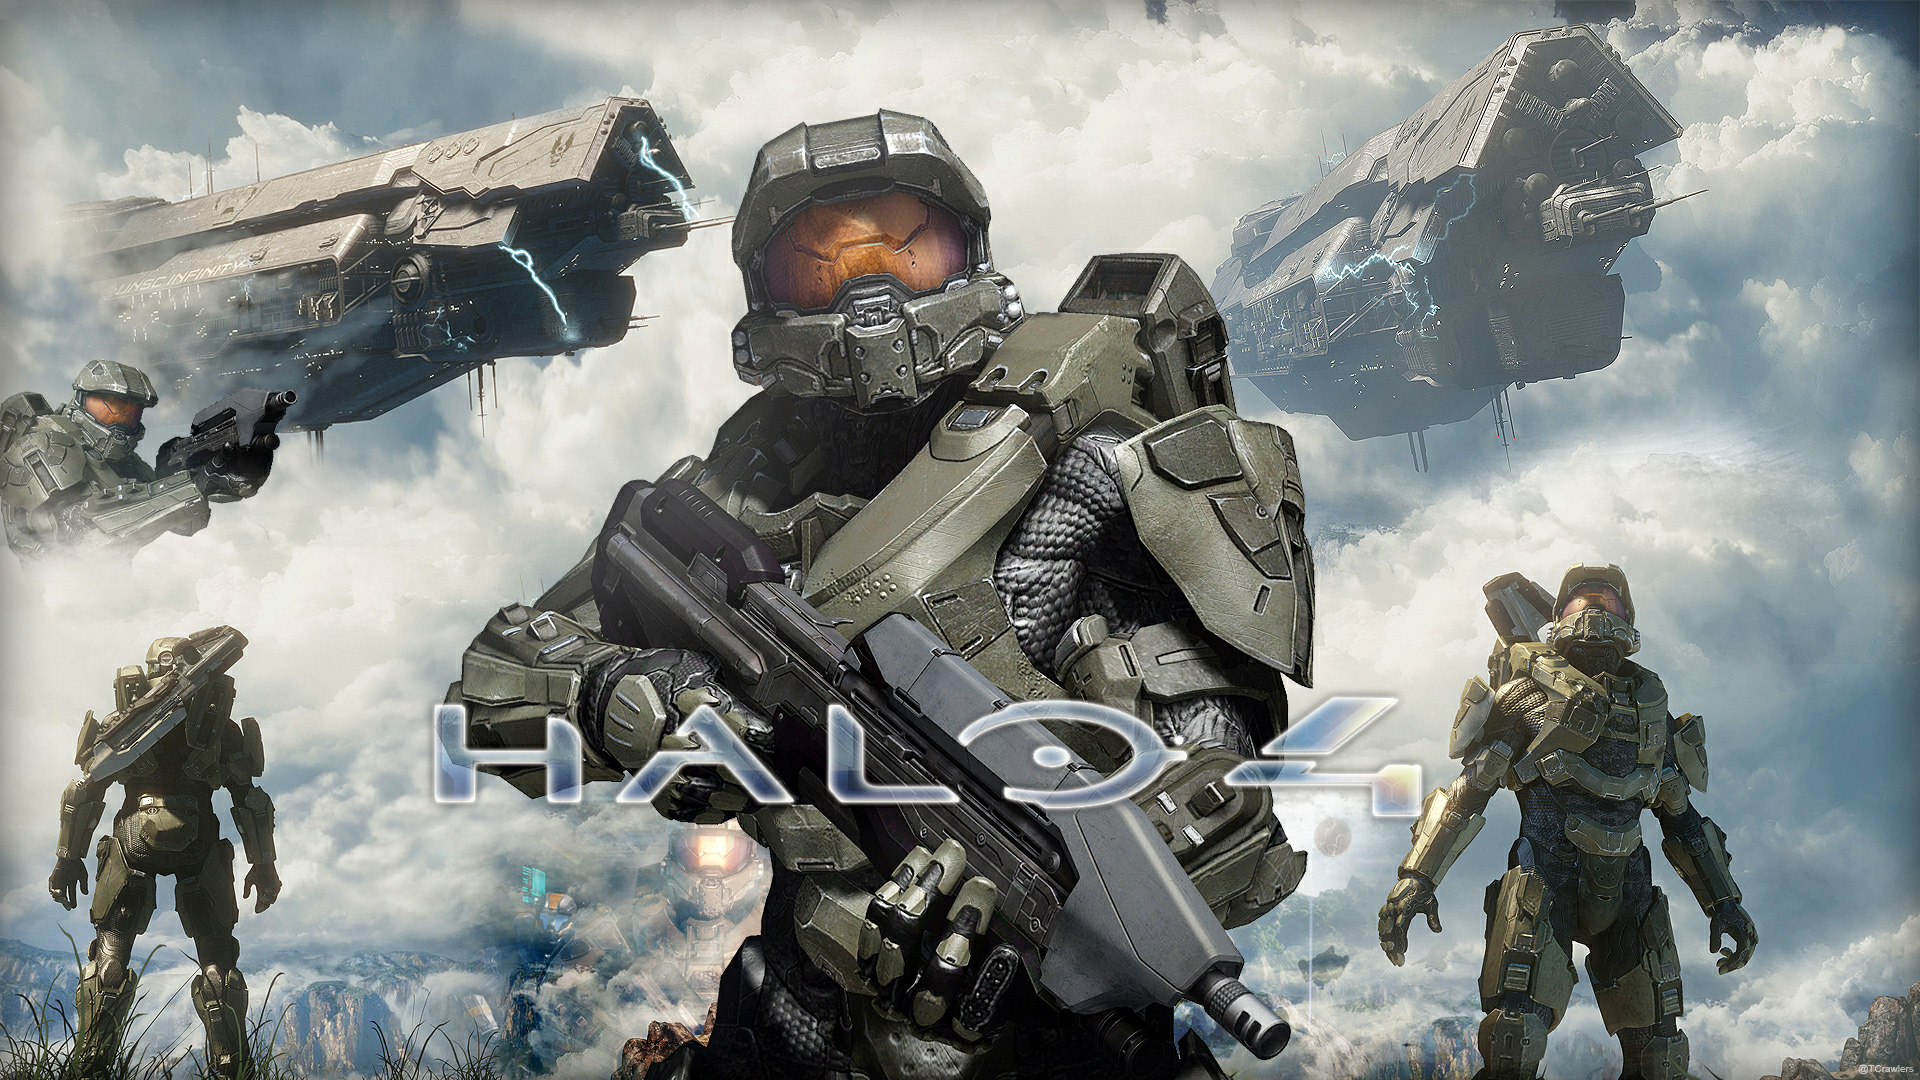 Halo 4 Wallpapers in HD 1920x1080